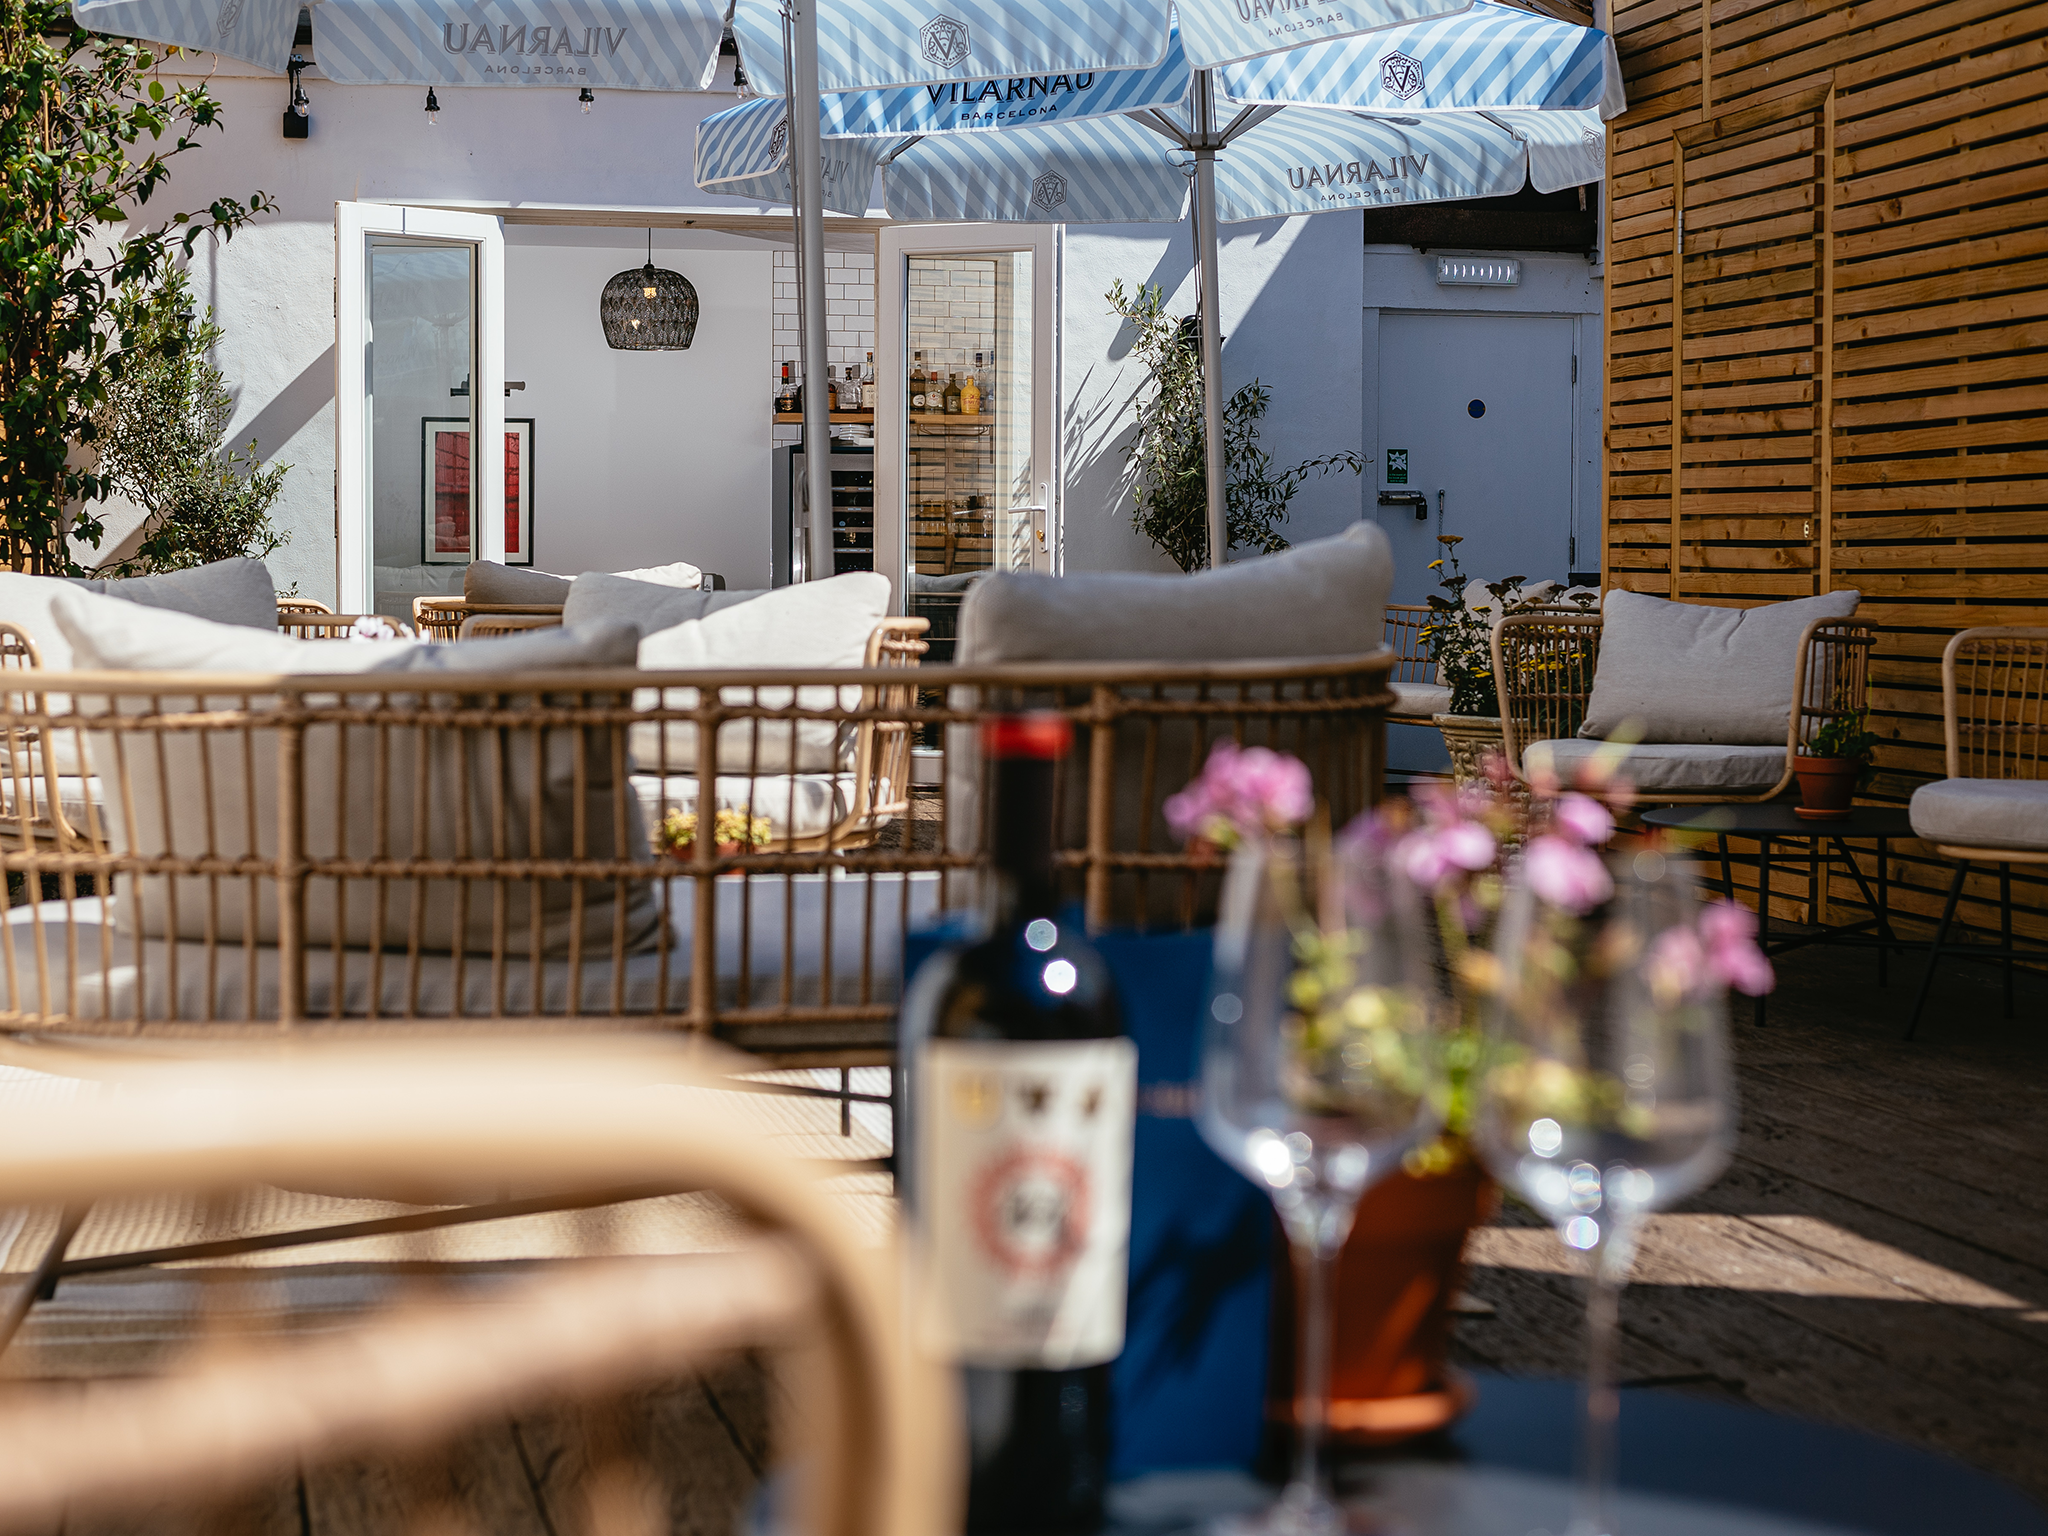 Rest up in the terrace garden with a Spanish wine or beer from the bar